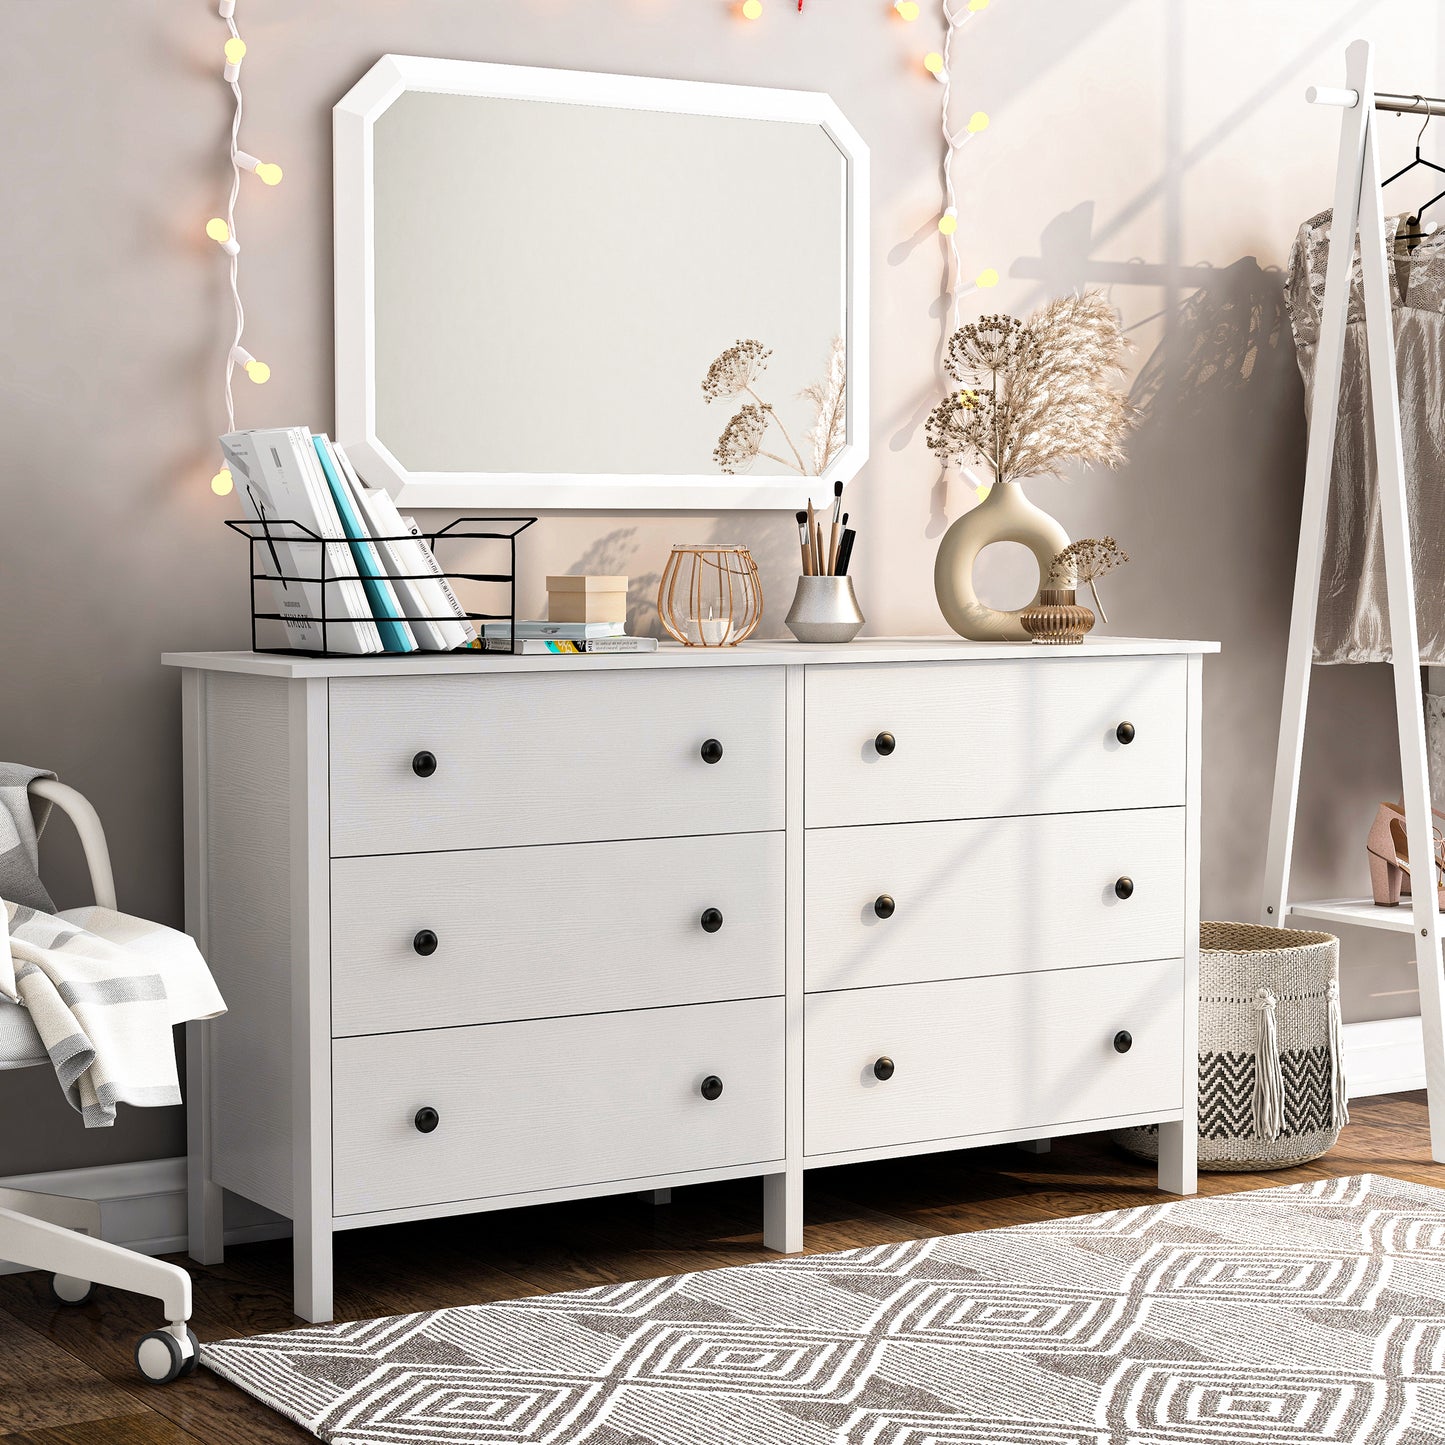 Right angled transitional white six-drawer youth dresser in a bedroom with accessories